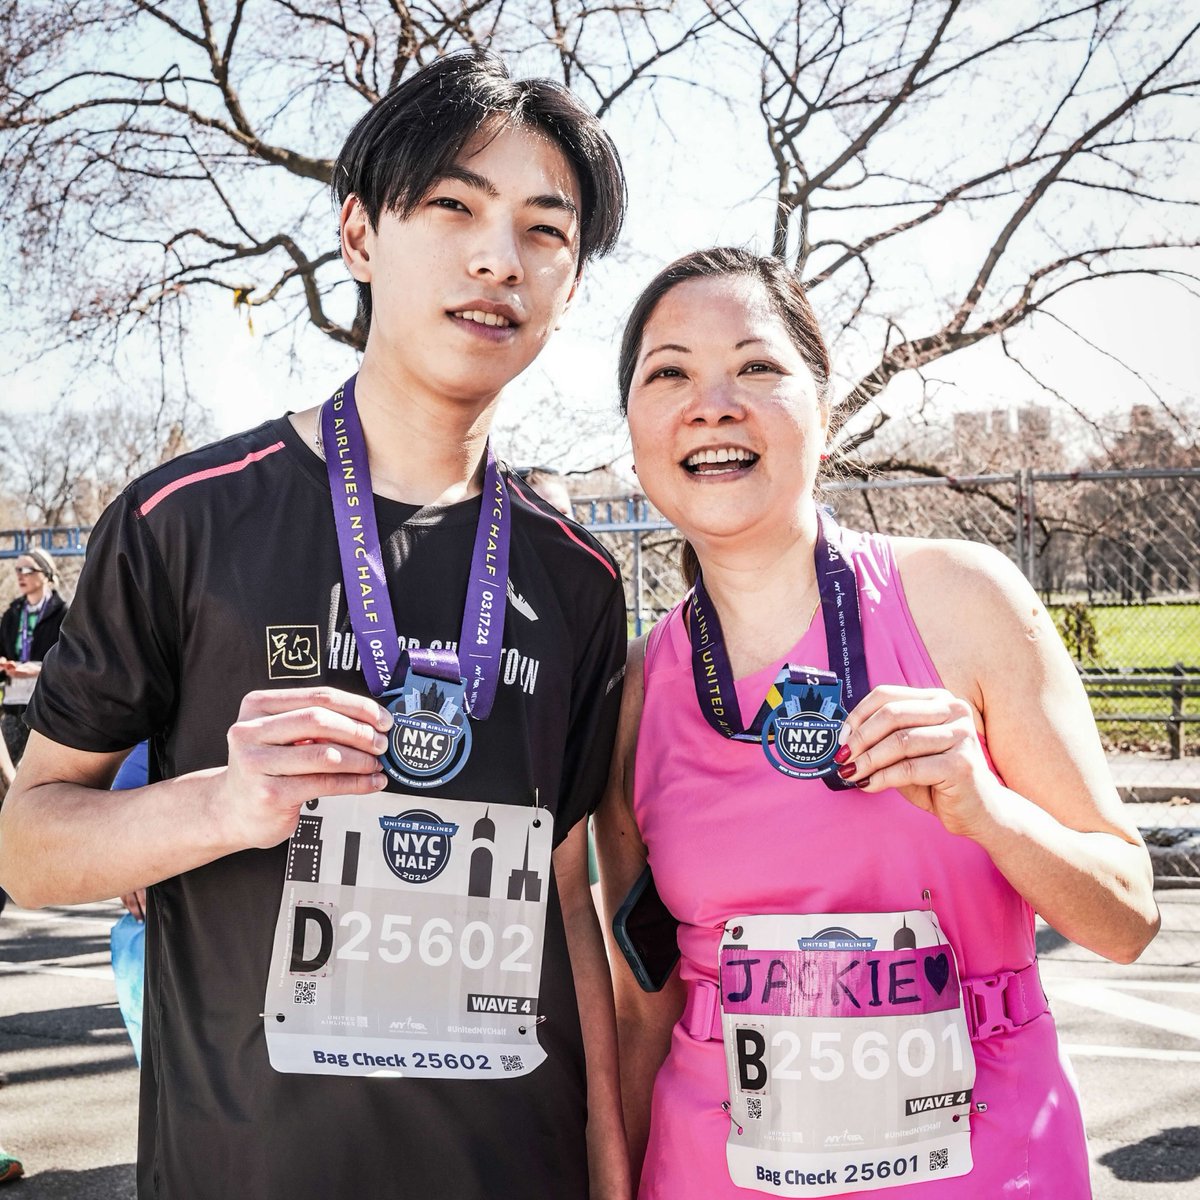 For Jackie Quan, running keeps her moving forward. In 2018, her sister passed away after battling cancer, then Jackie had a hysterectomy. Running helped her cope with grief and regain strength. Learn more about Jackie's running journey: bit.ly/4dBI0Gn